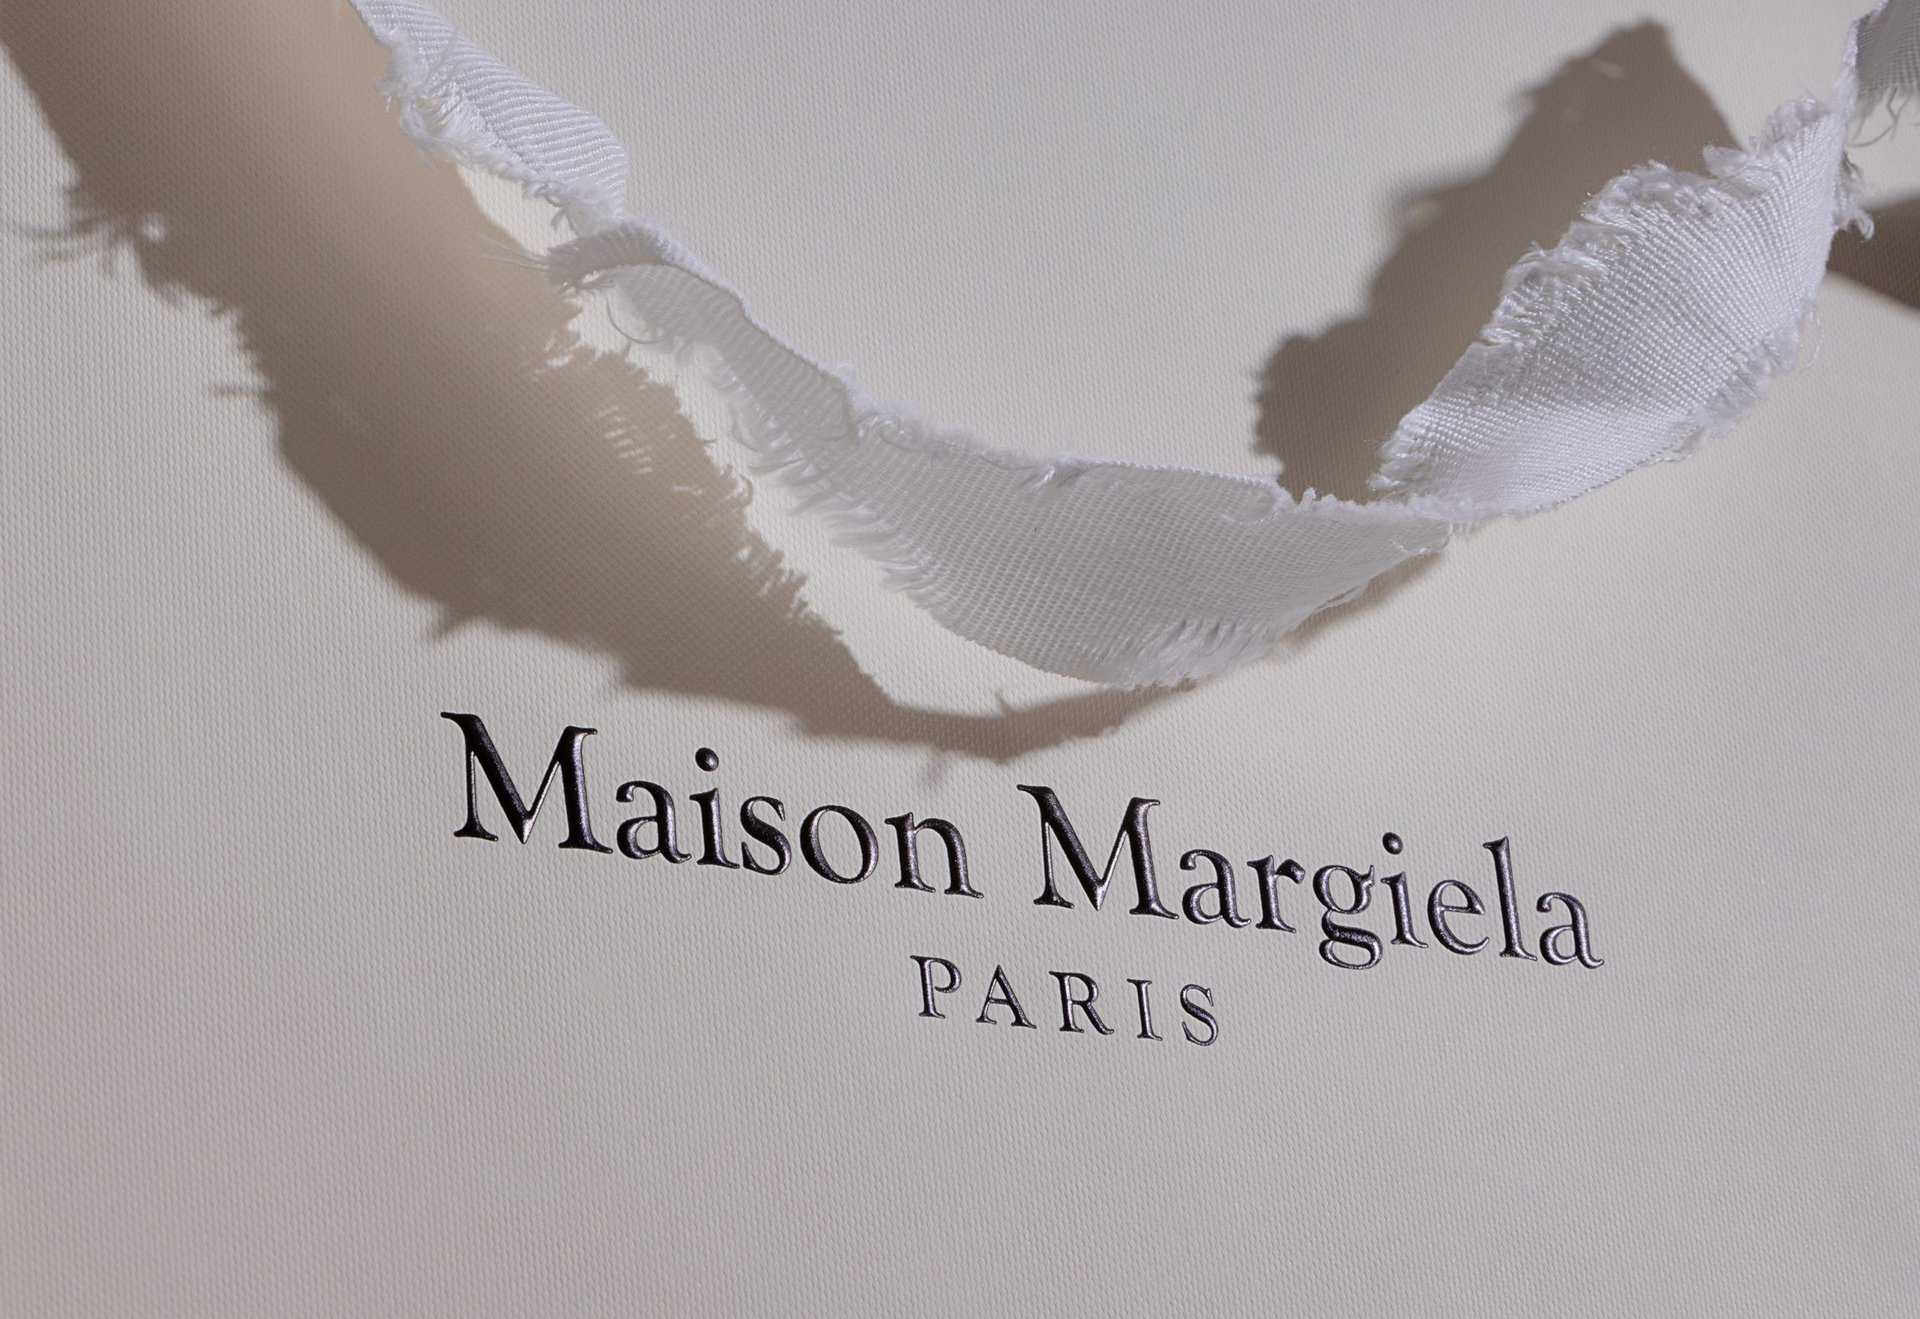 Luxury retail packaging Maison Margiela torn handles Recyclable Packaging Idpdirect.com sustainable Manufacturing